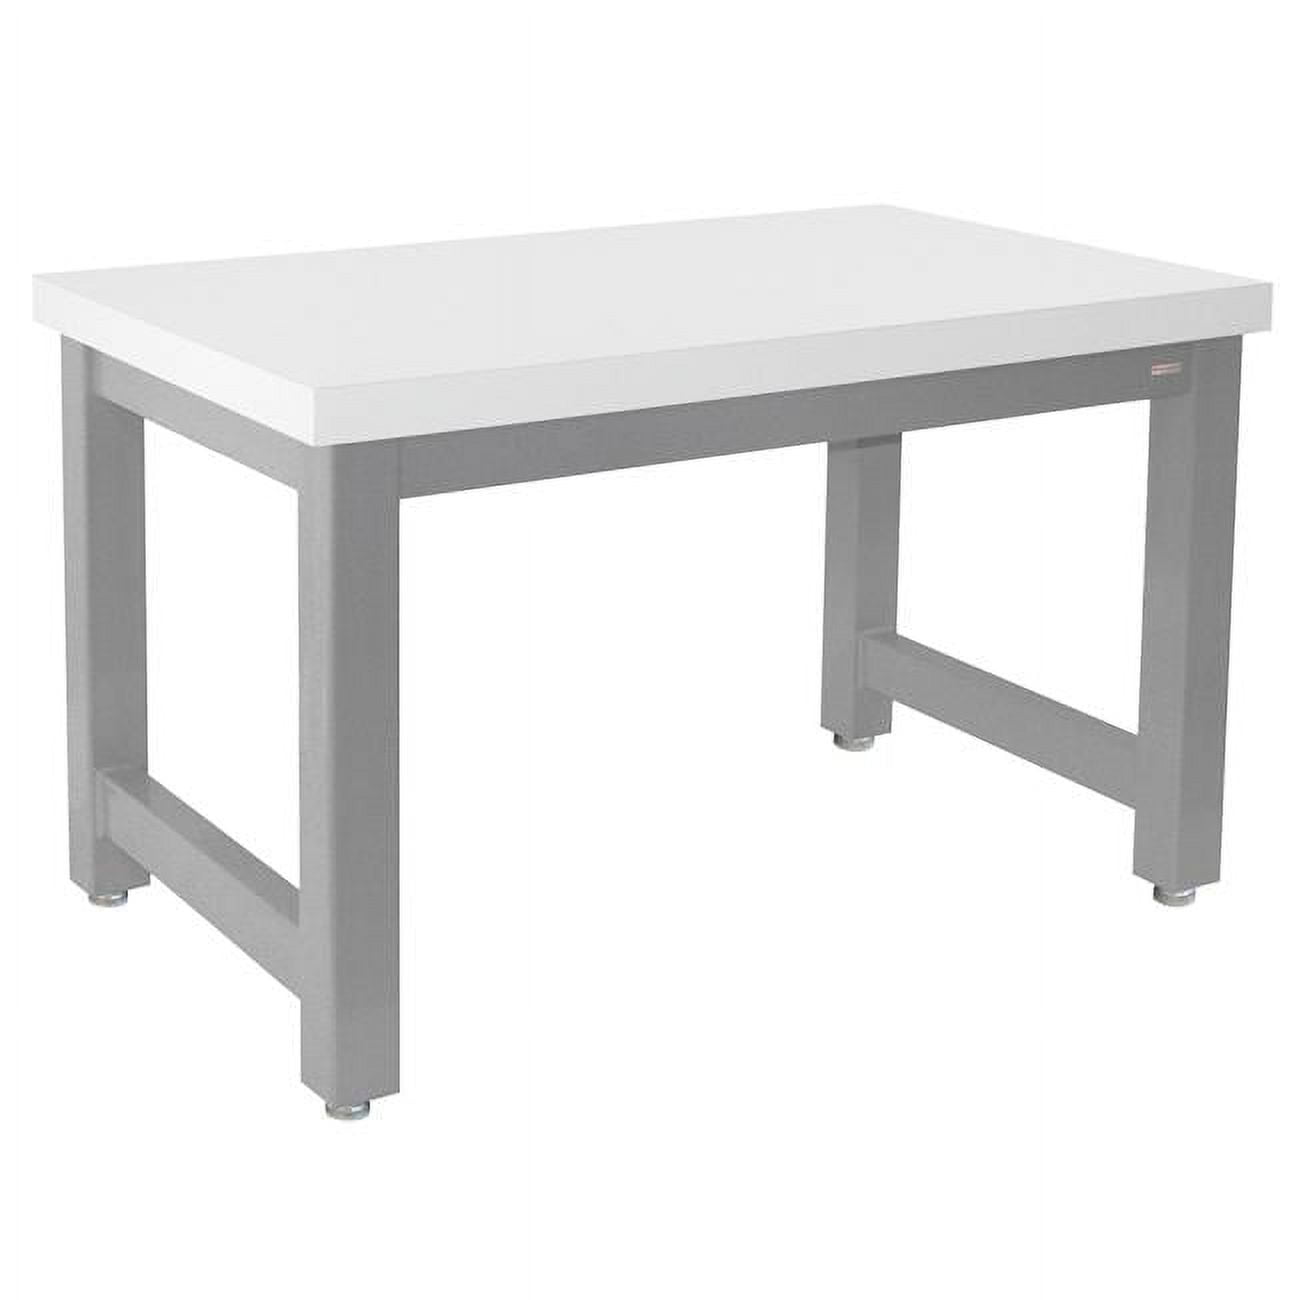 24 x 168 in. Harding Heavy Duty Workbenches with Formica Laminate Top, Gray & White -  KD Gabinetes, KD2202148